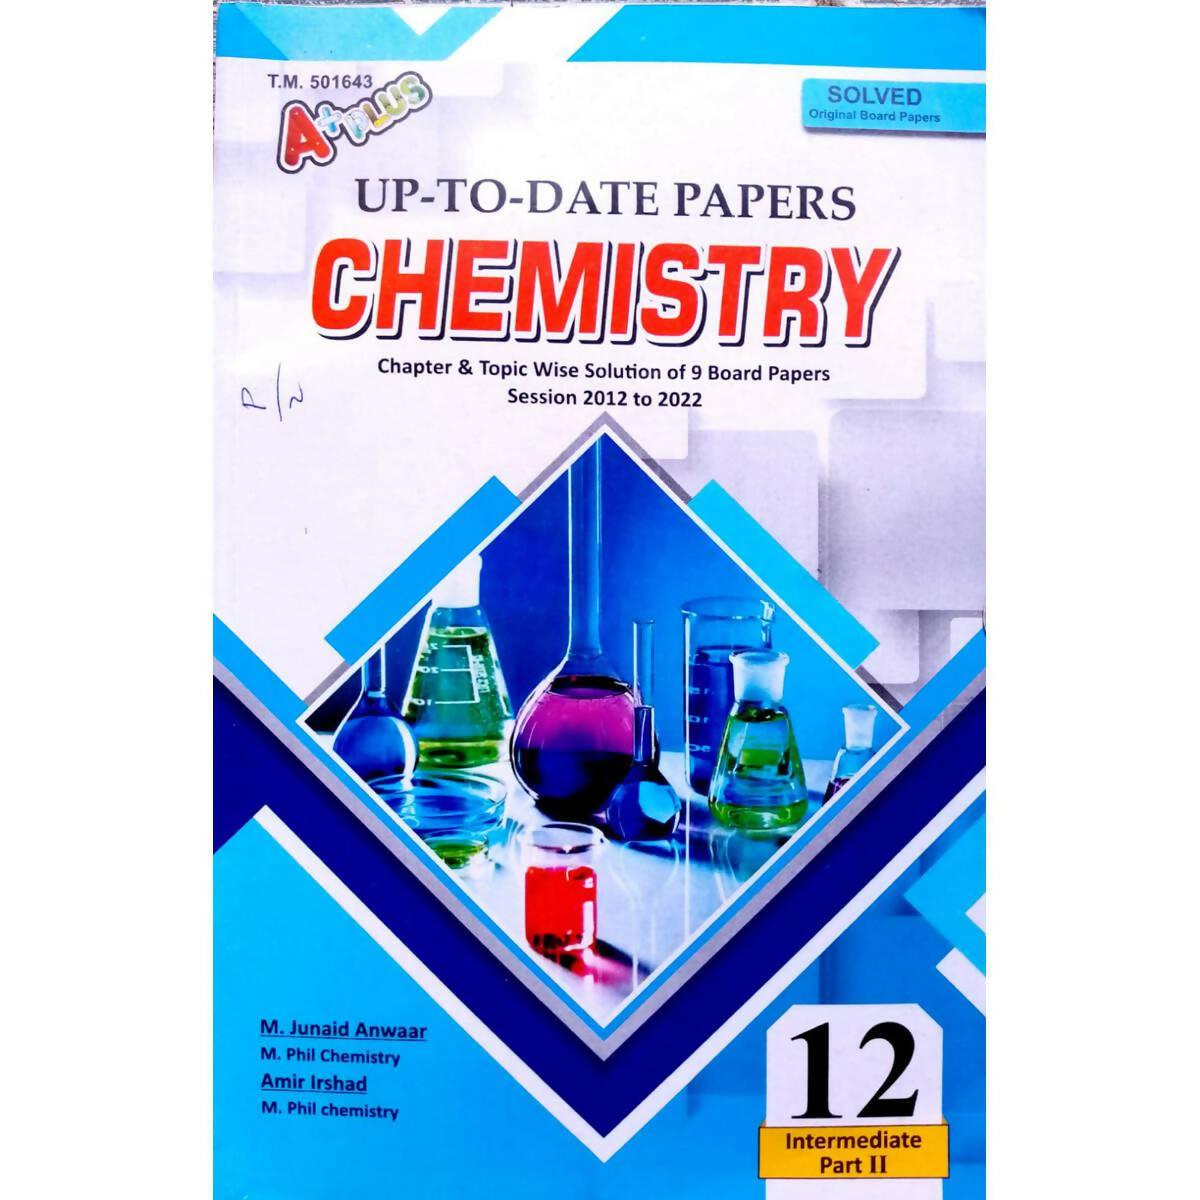 Aplus up to Date Chemistry Intermediate part2 Chapter & topic wise solution Of 9 Board papers Session 2012 2022 solevd original Board papers - ValueBox